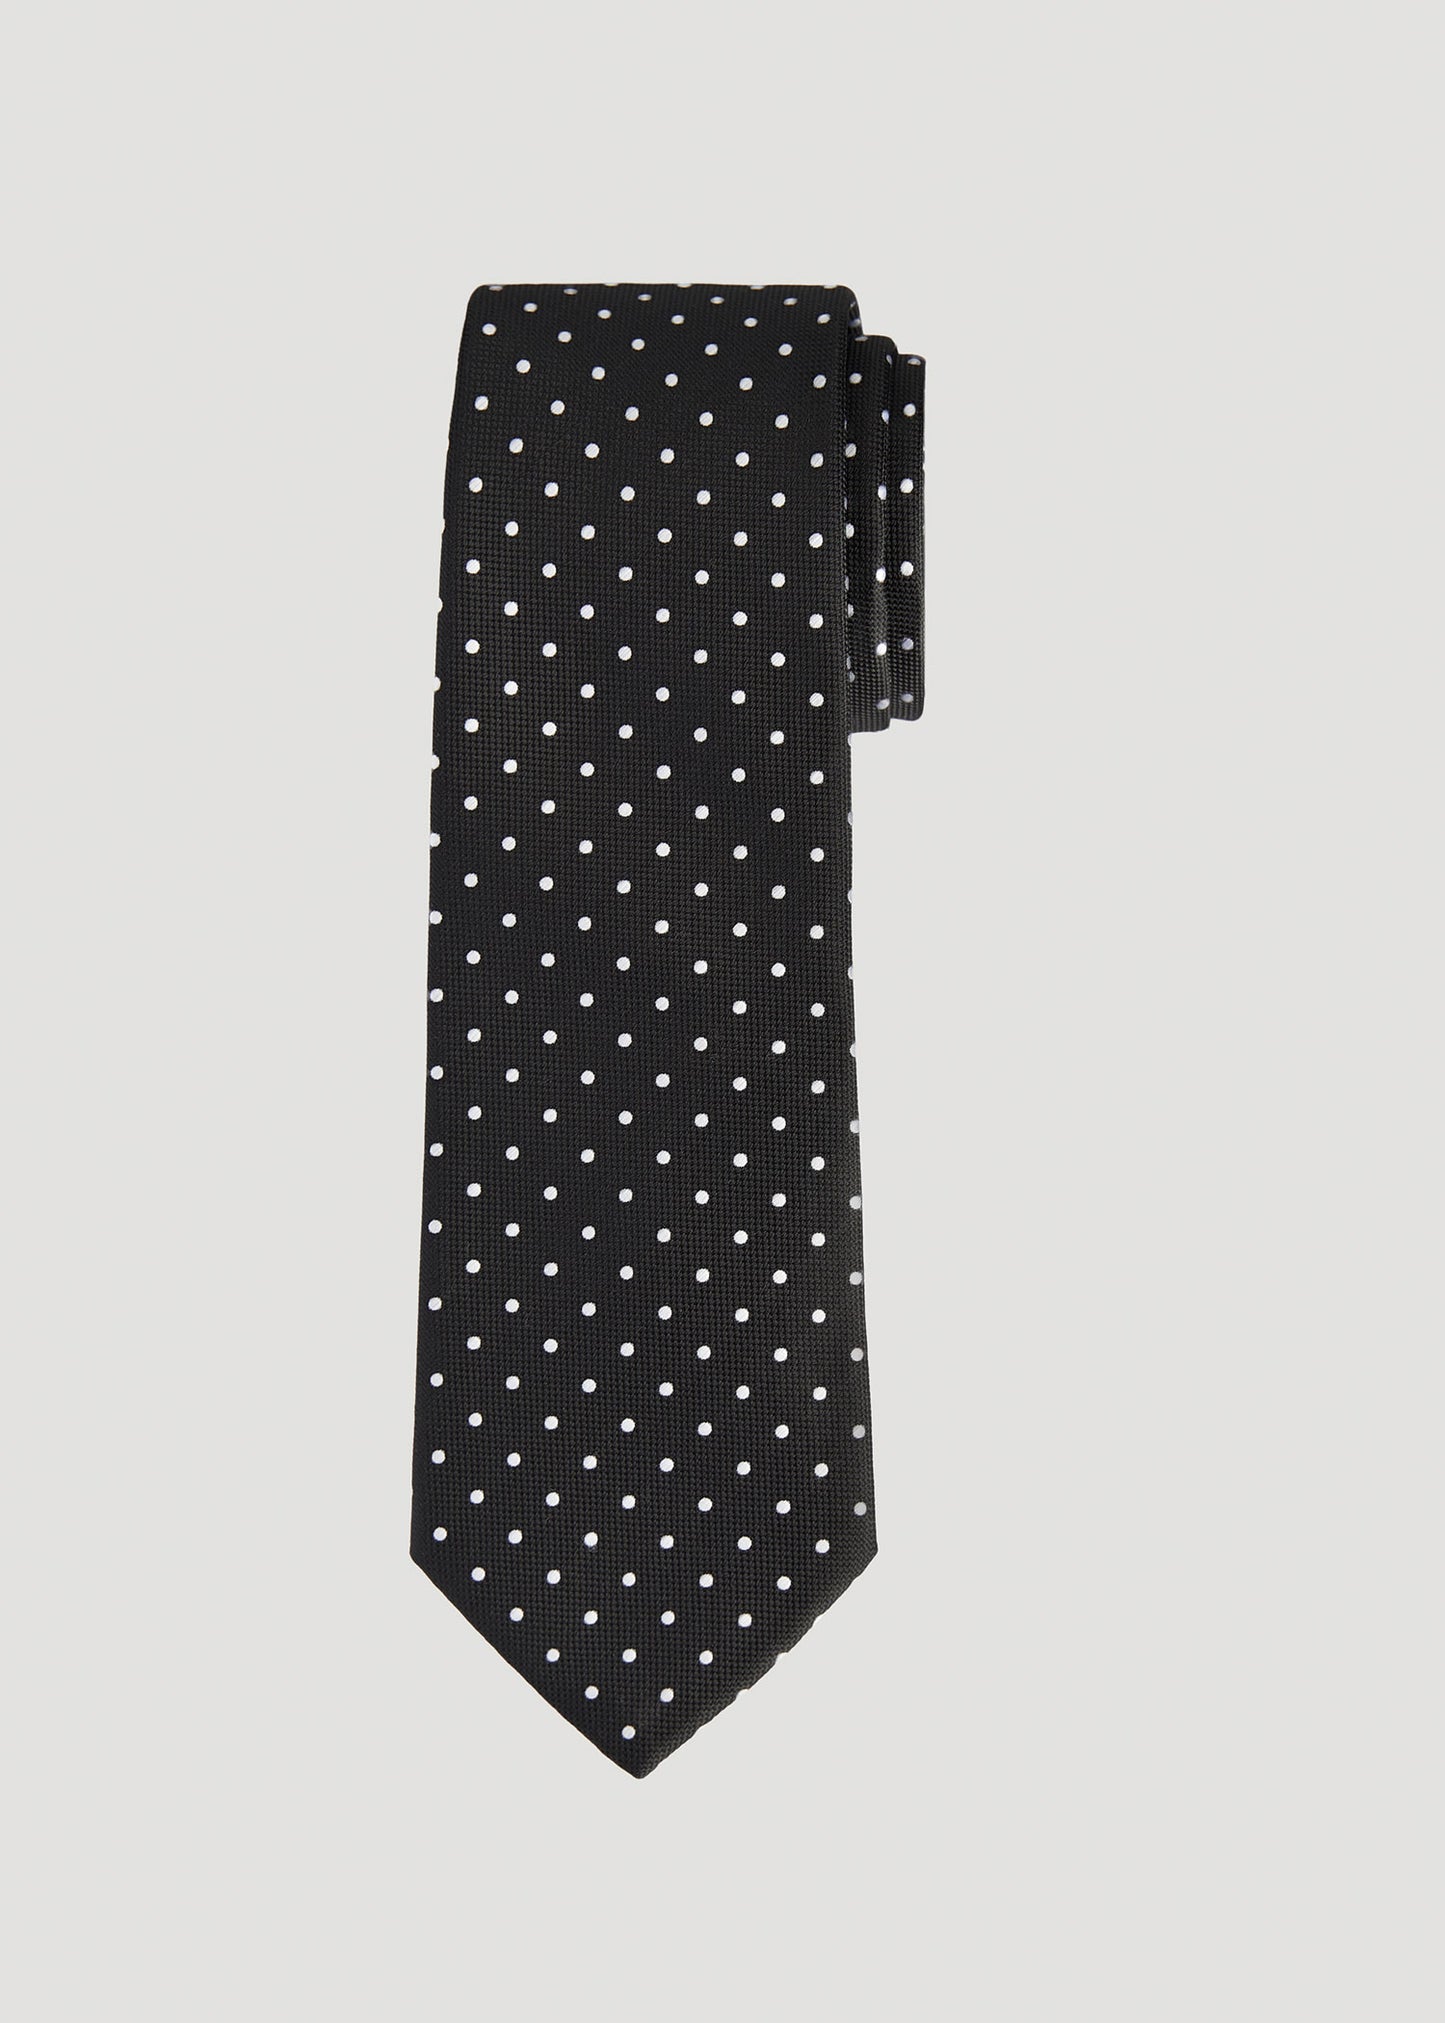 Dress Ties for Tall Men in White Dot by American Tall